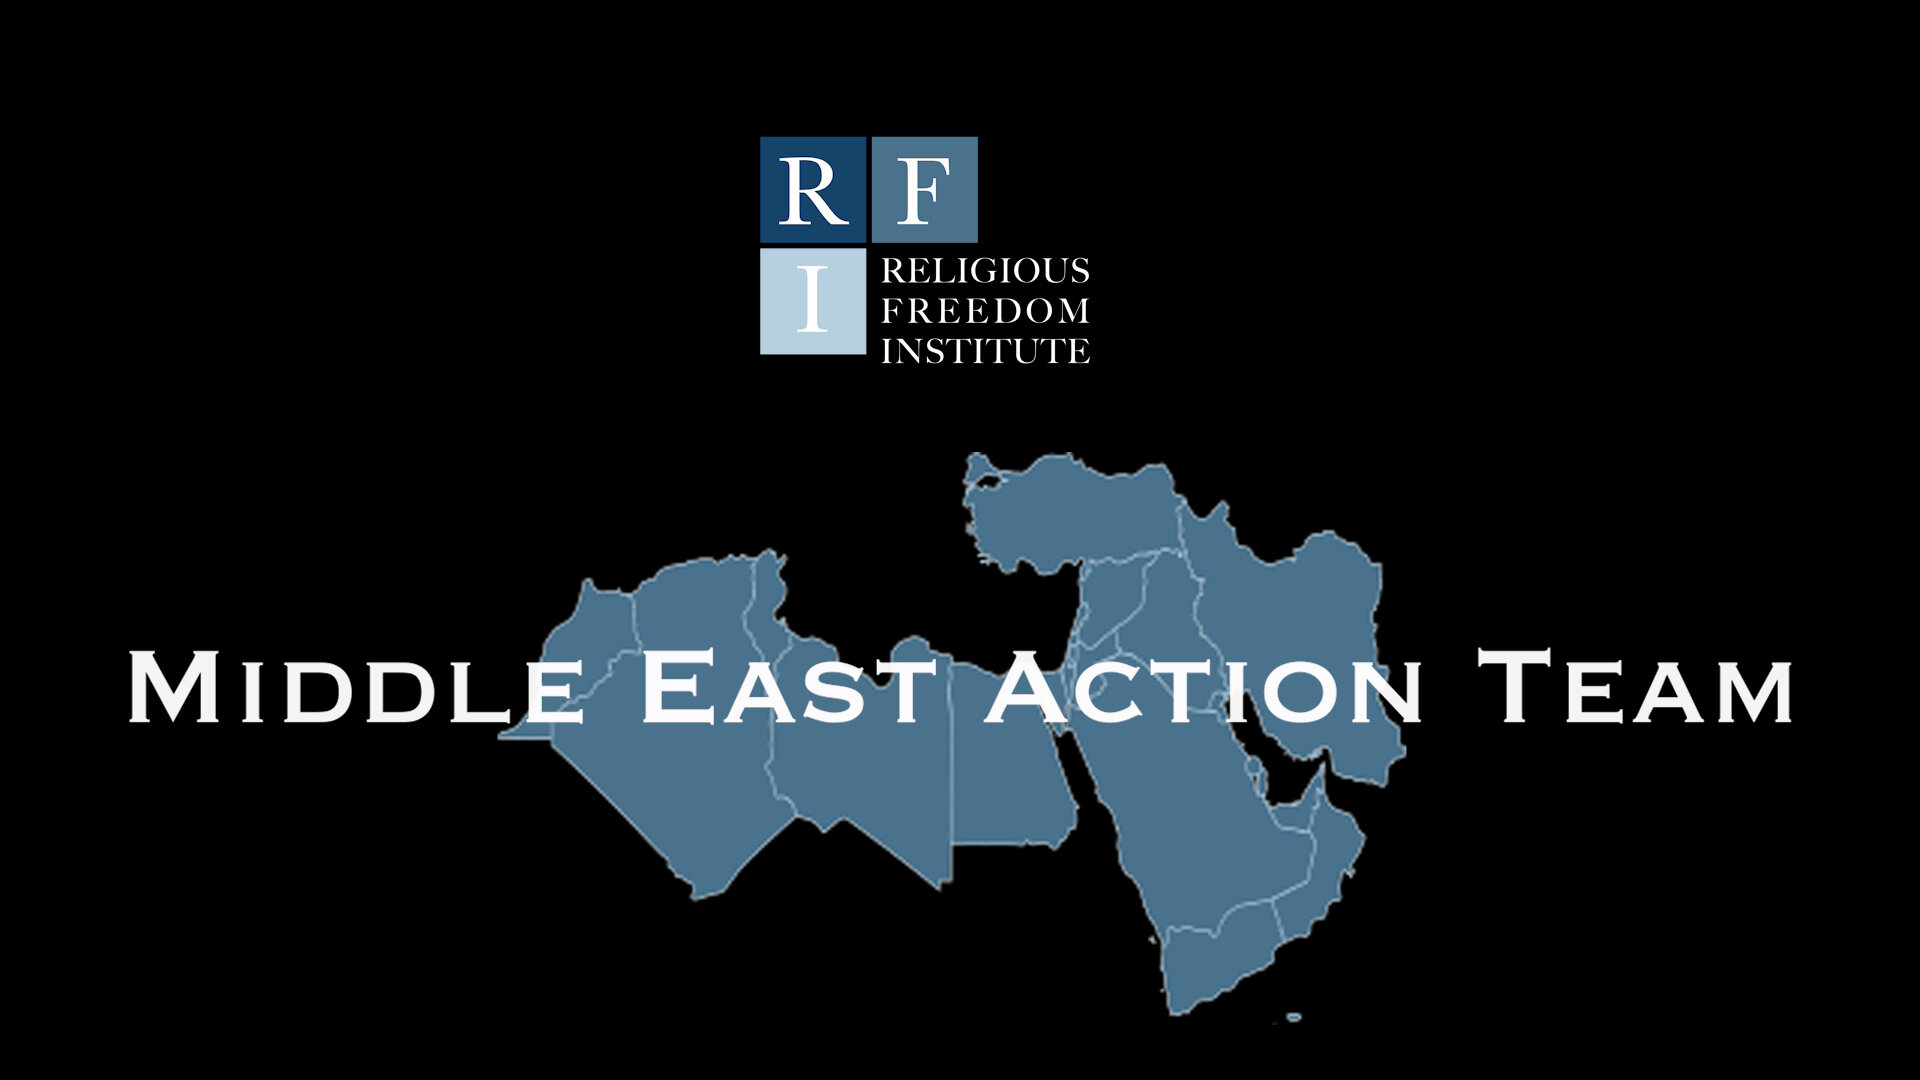 Featured image for “Interview | Jeremy Barker, Director of RFI Middle East Action Team, interviews Ayman Abdel Nour, President Syrian Christians for Peace”